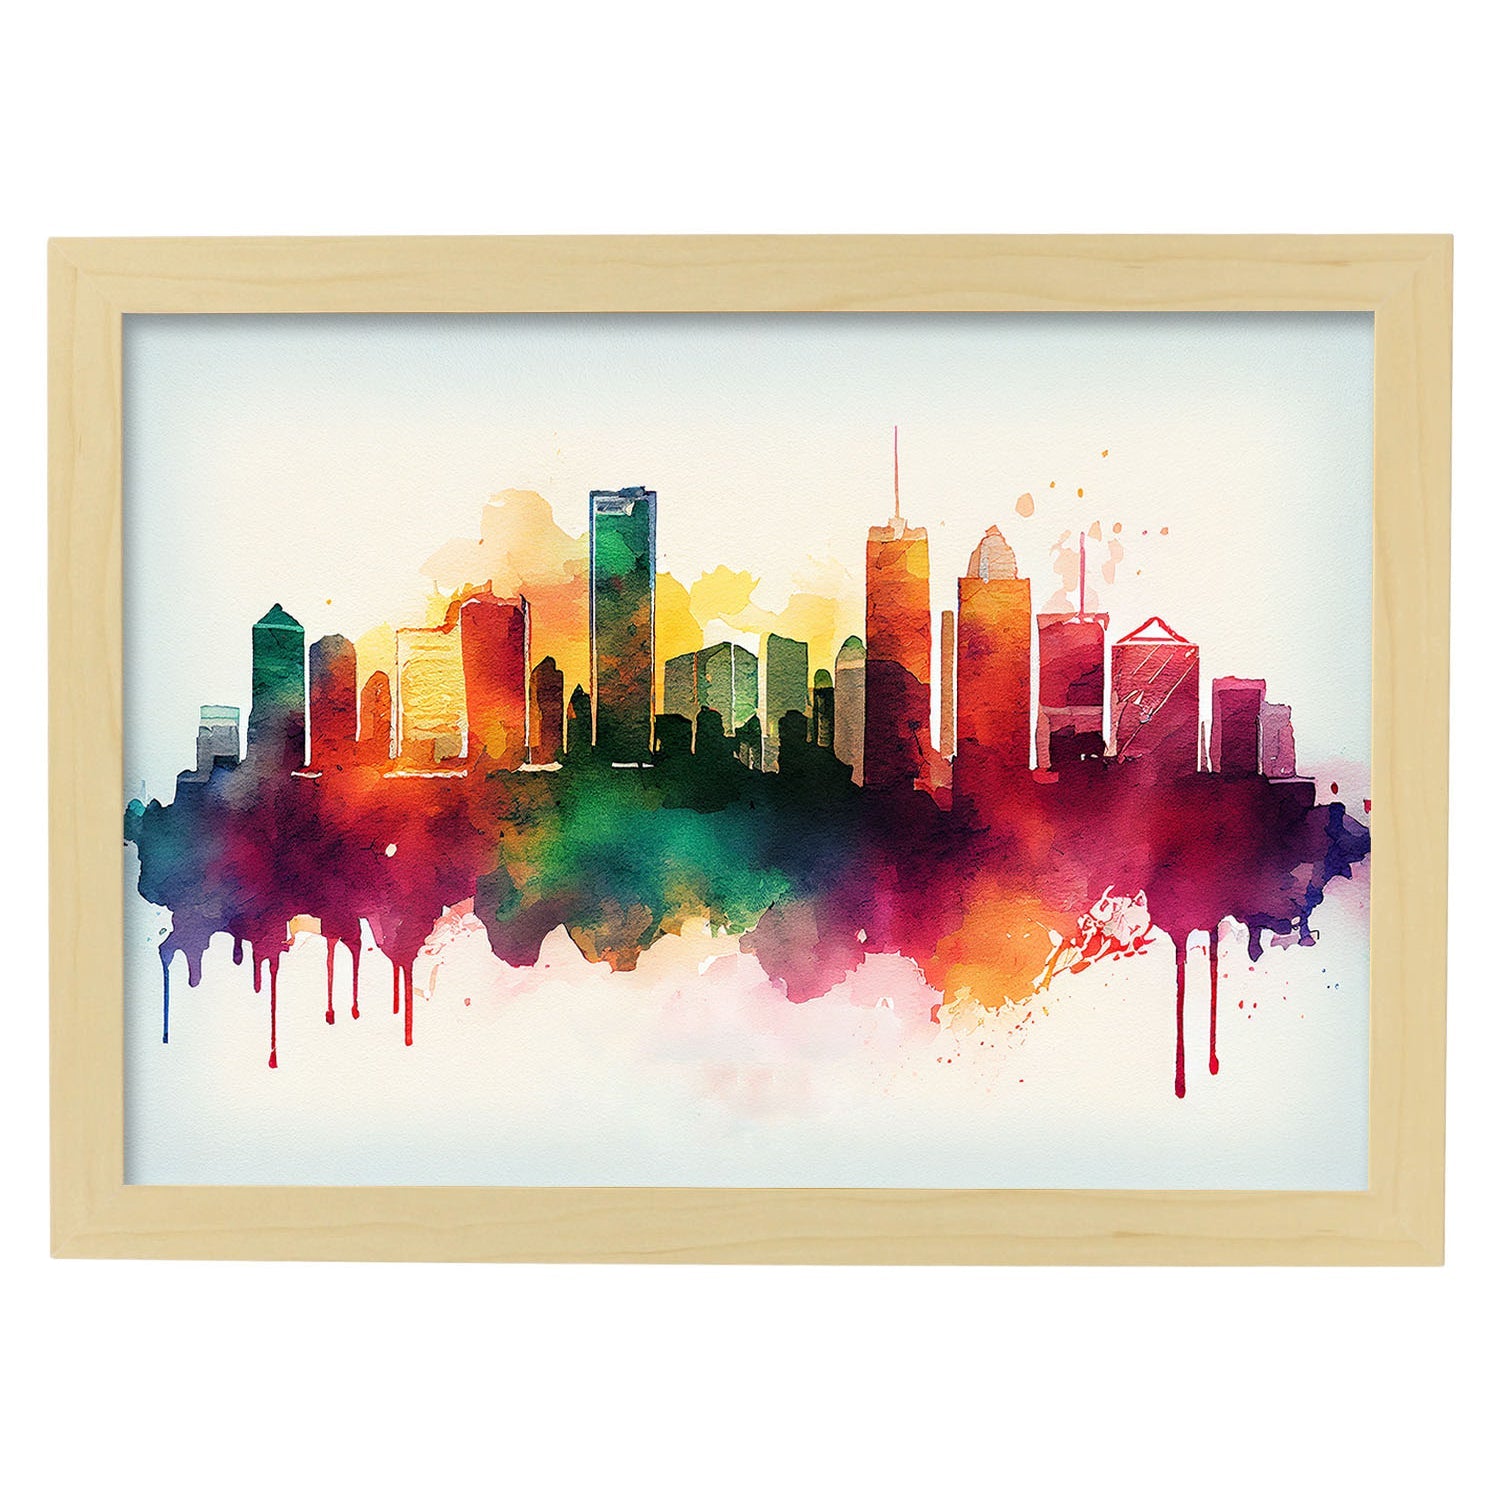 Nacnic watercolor of a skyline of the city of Miami_2. Aesthetic Wall Art Prints for Bedroom or Living Room Design.-Artwork-Nacnic-A4-Marco Madera Clara-Nacnic Estudio SL